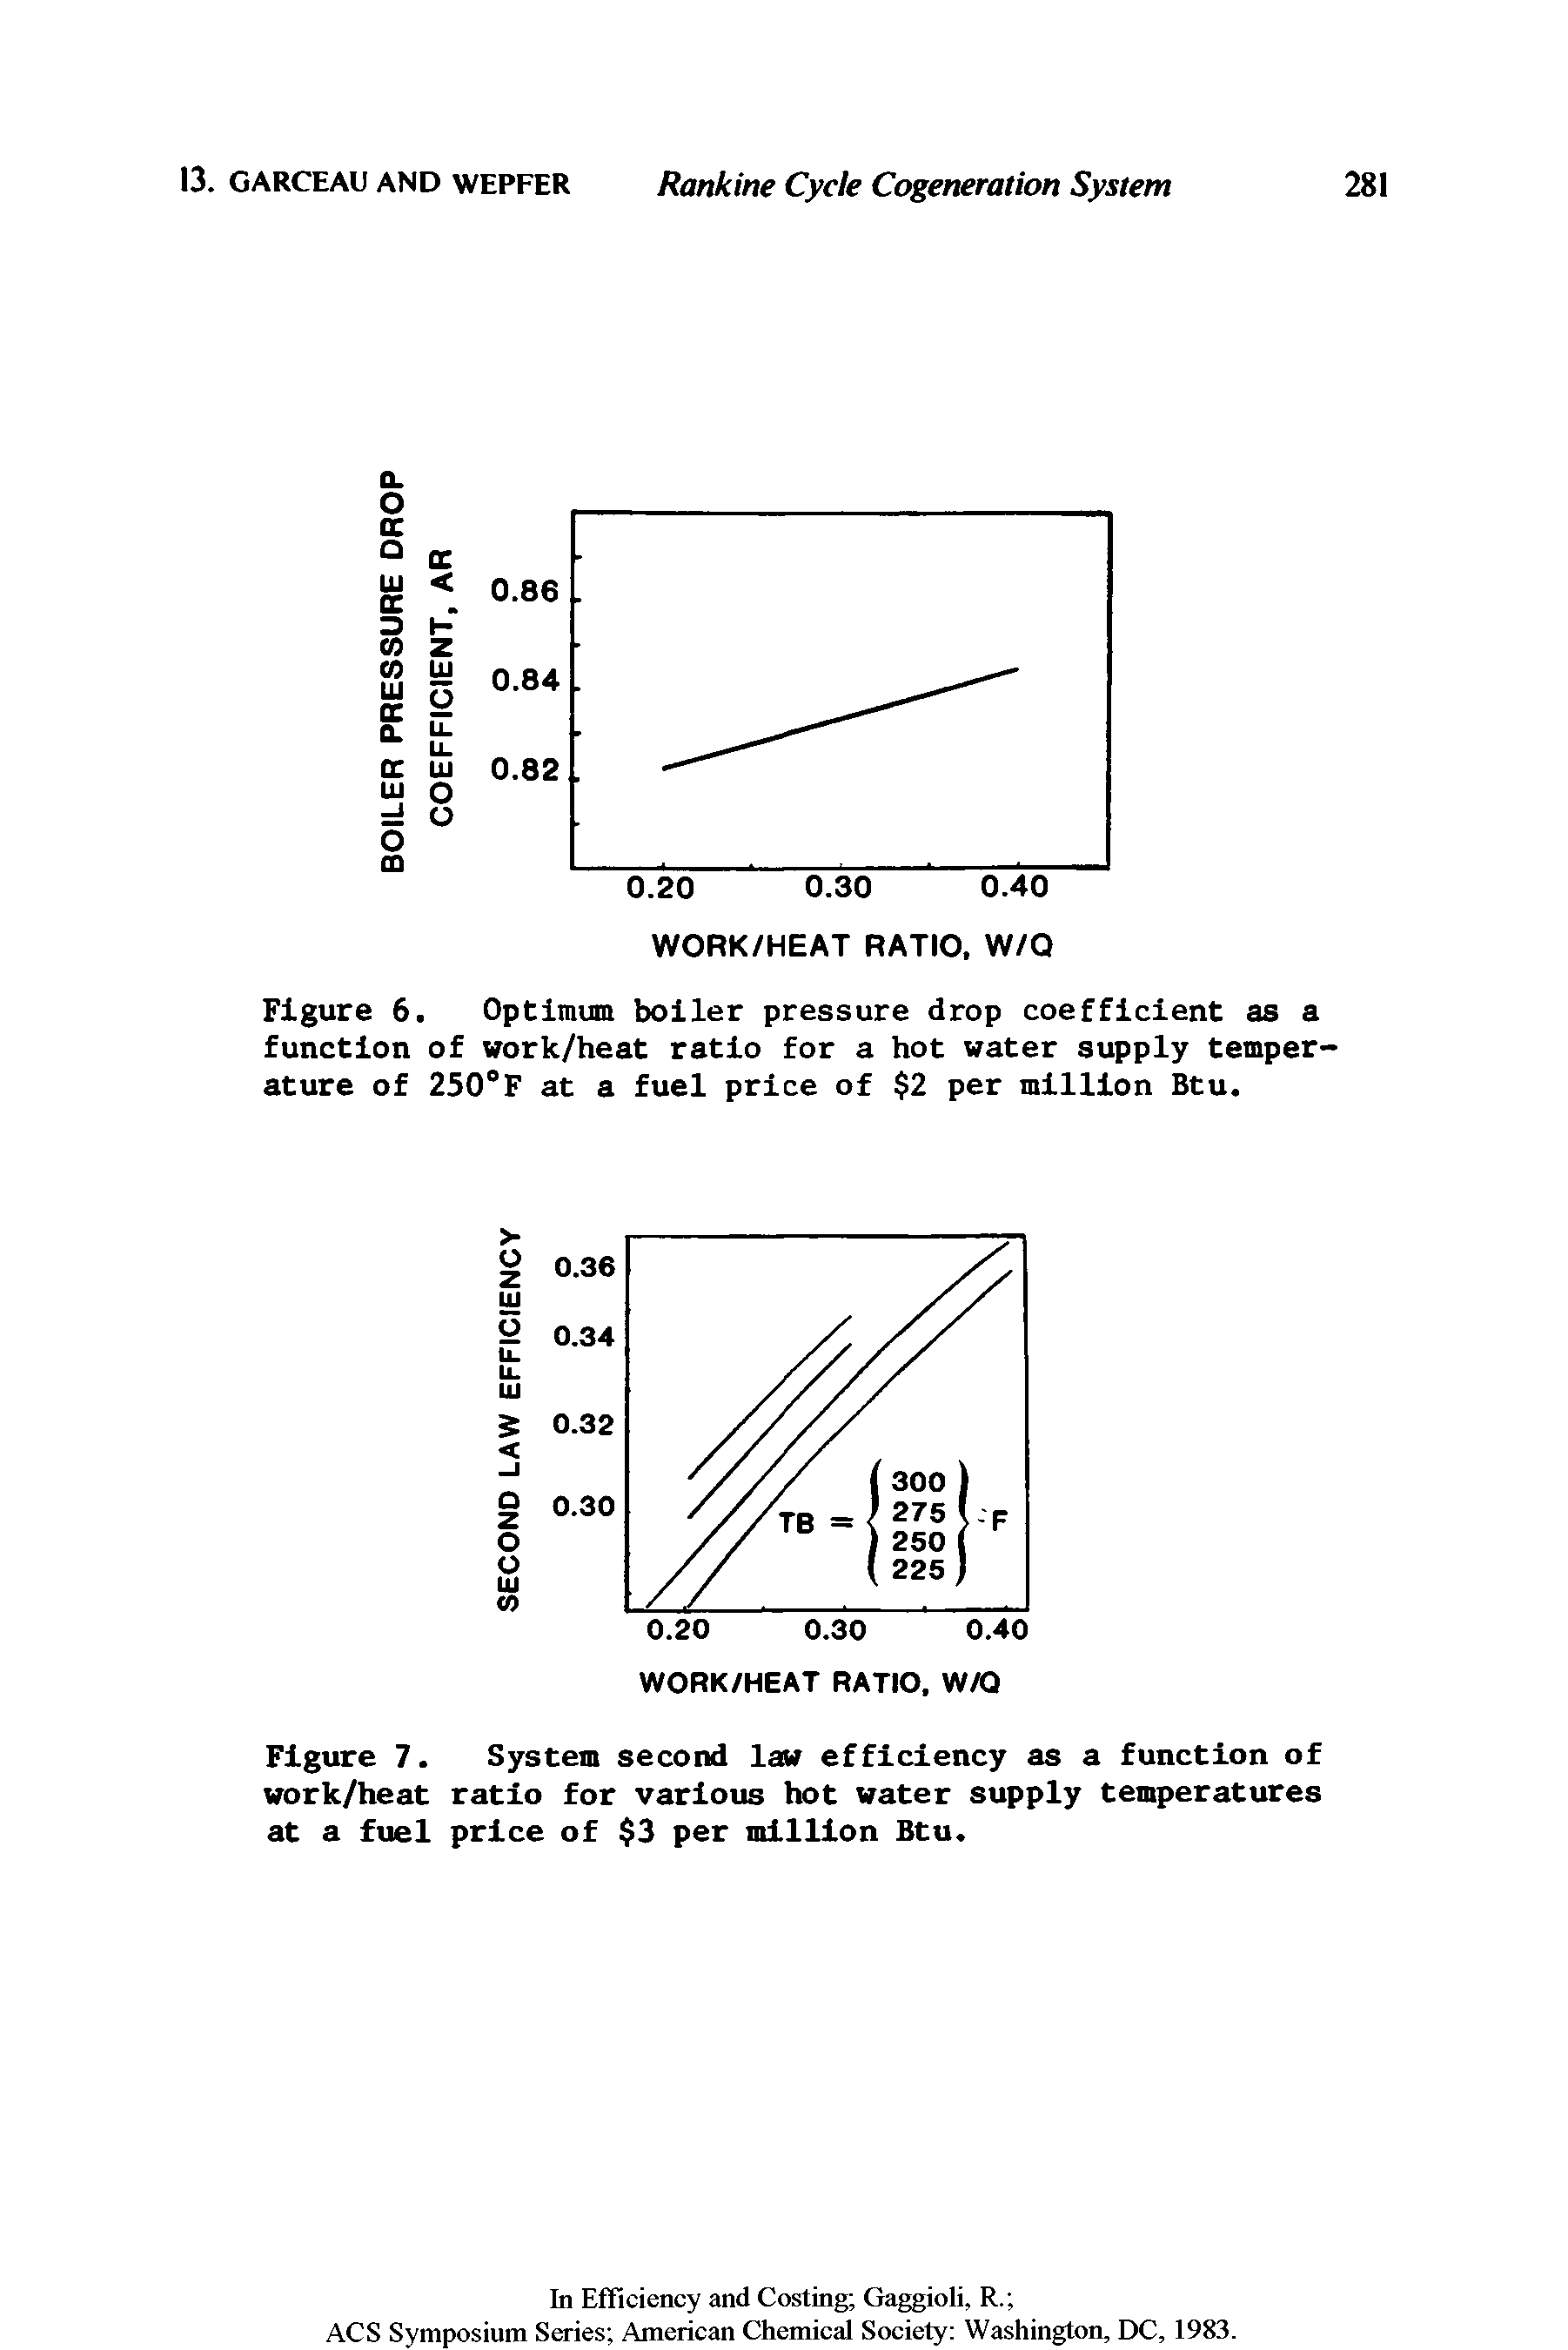 Figure 7. System second law efficiency as a function of work/heat ratio for various hot water supply temperatures at a fuel price of 3 per million Btu.